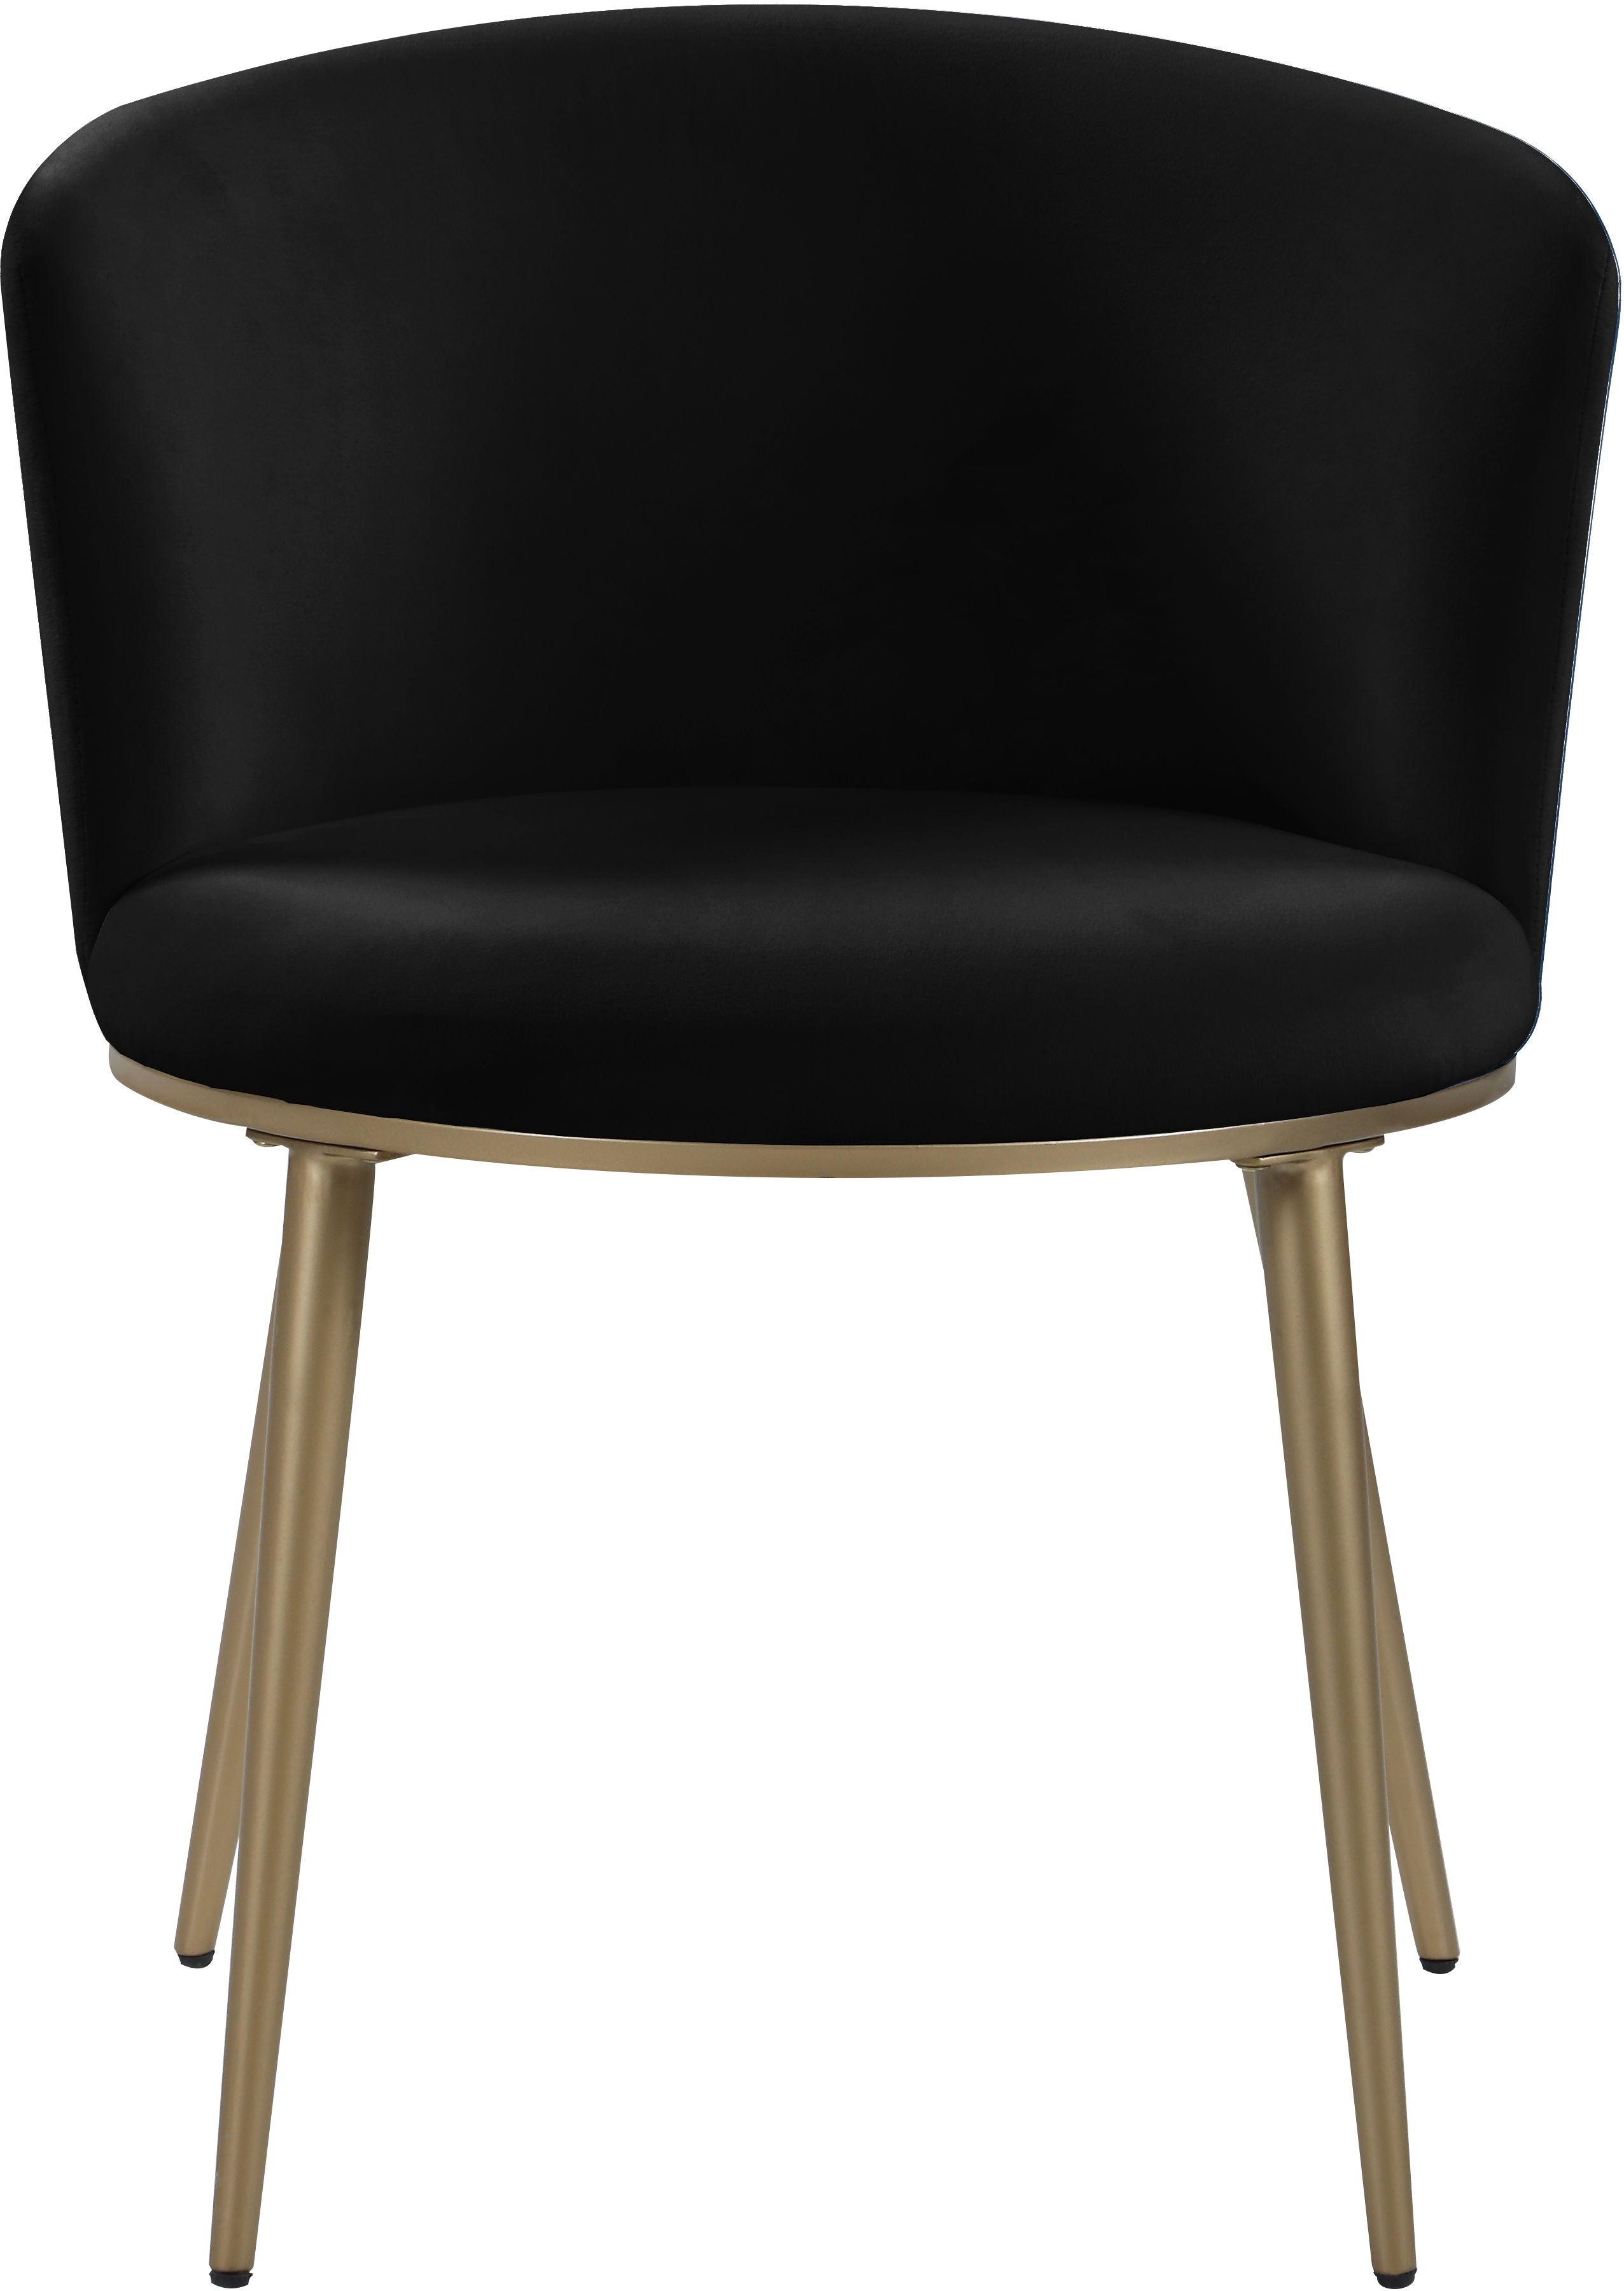 Meridian Furniture - Skylar - Dining Chair with Gold Legs (Set of 2) - 5th Avenue Furniture